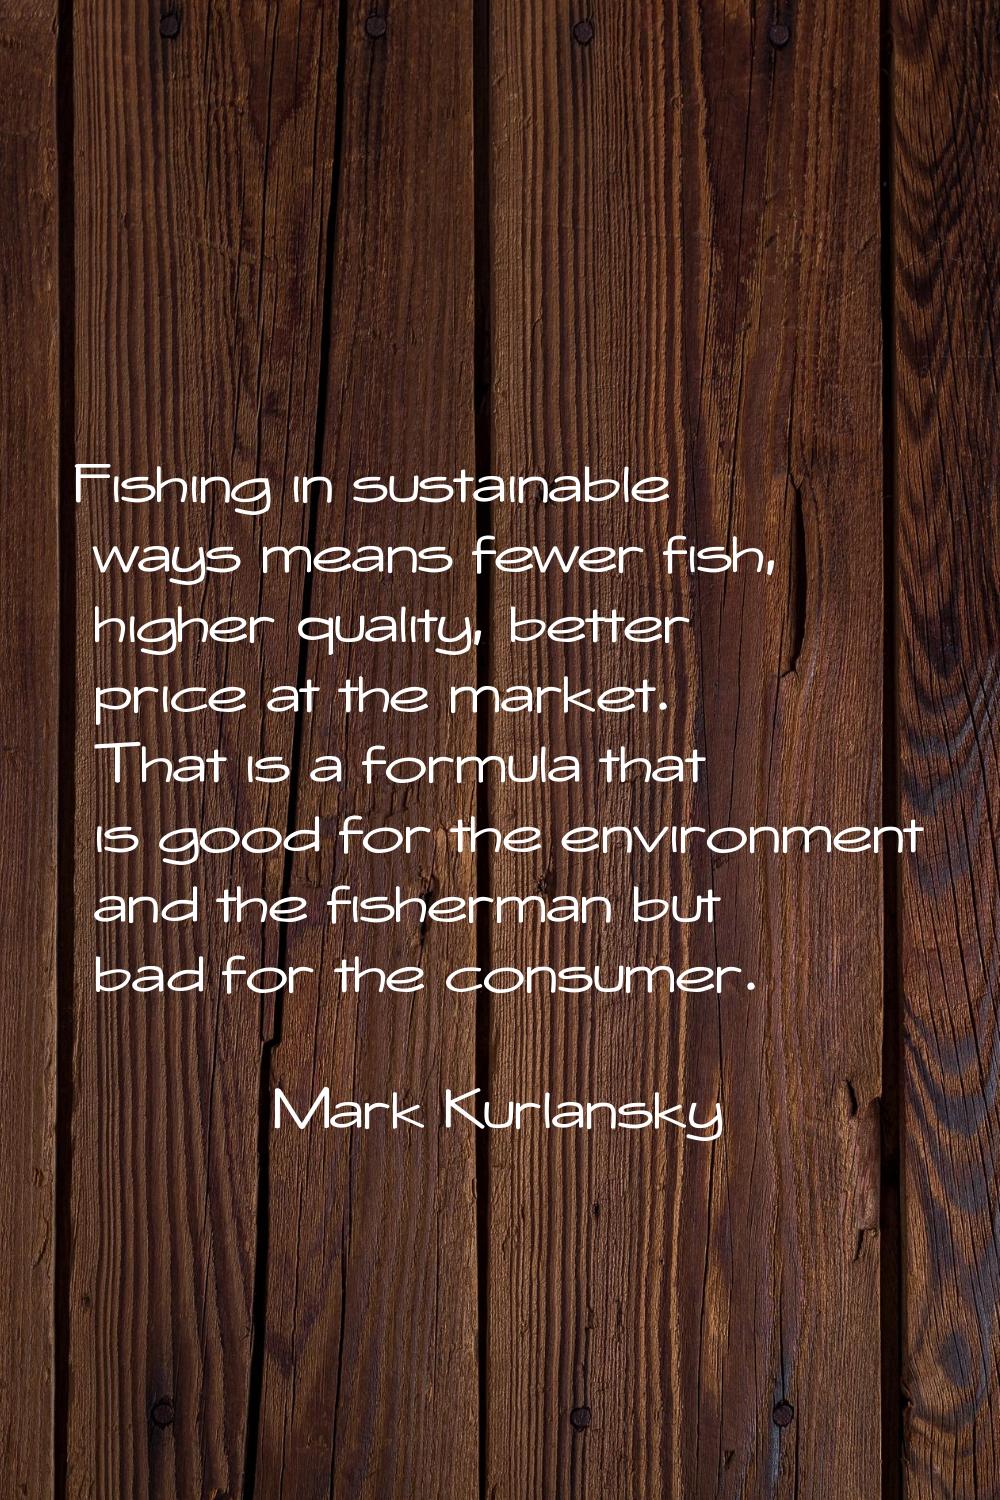 Fishing in sustainable ways means fewer fish, higher quality, better price at the market. That is a